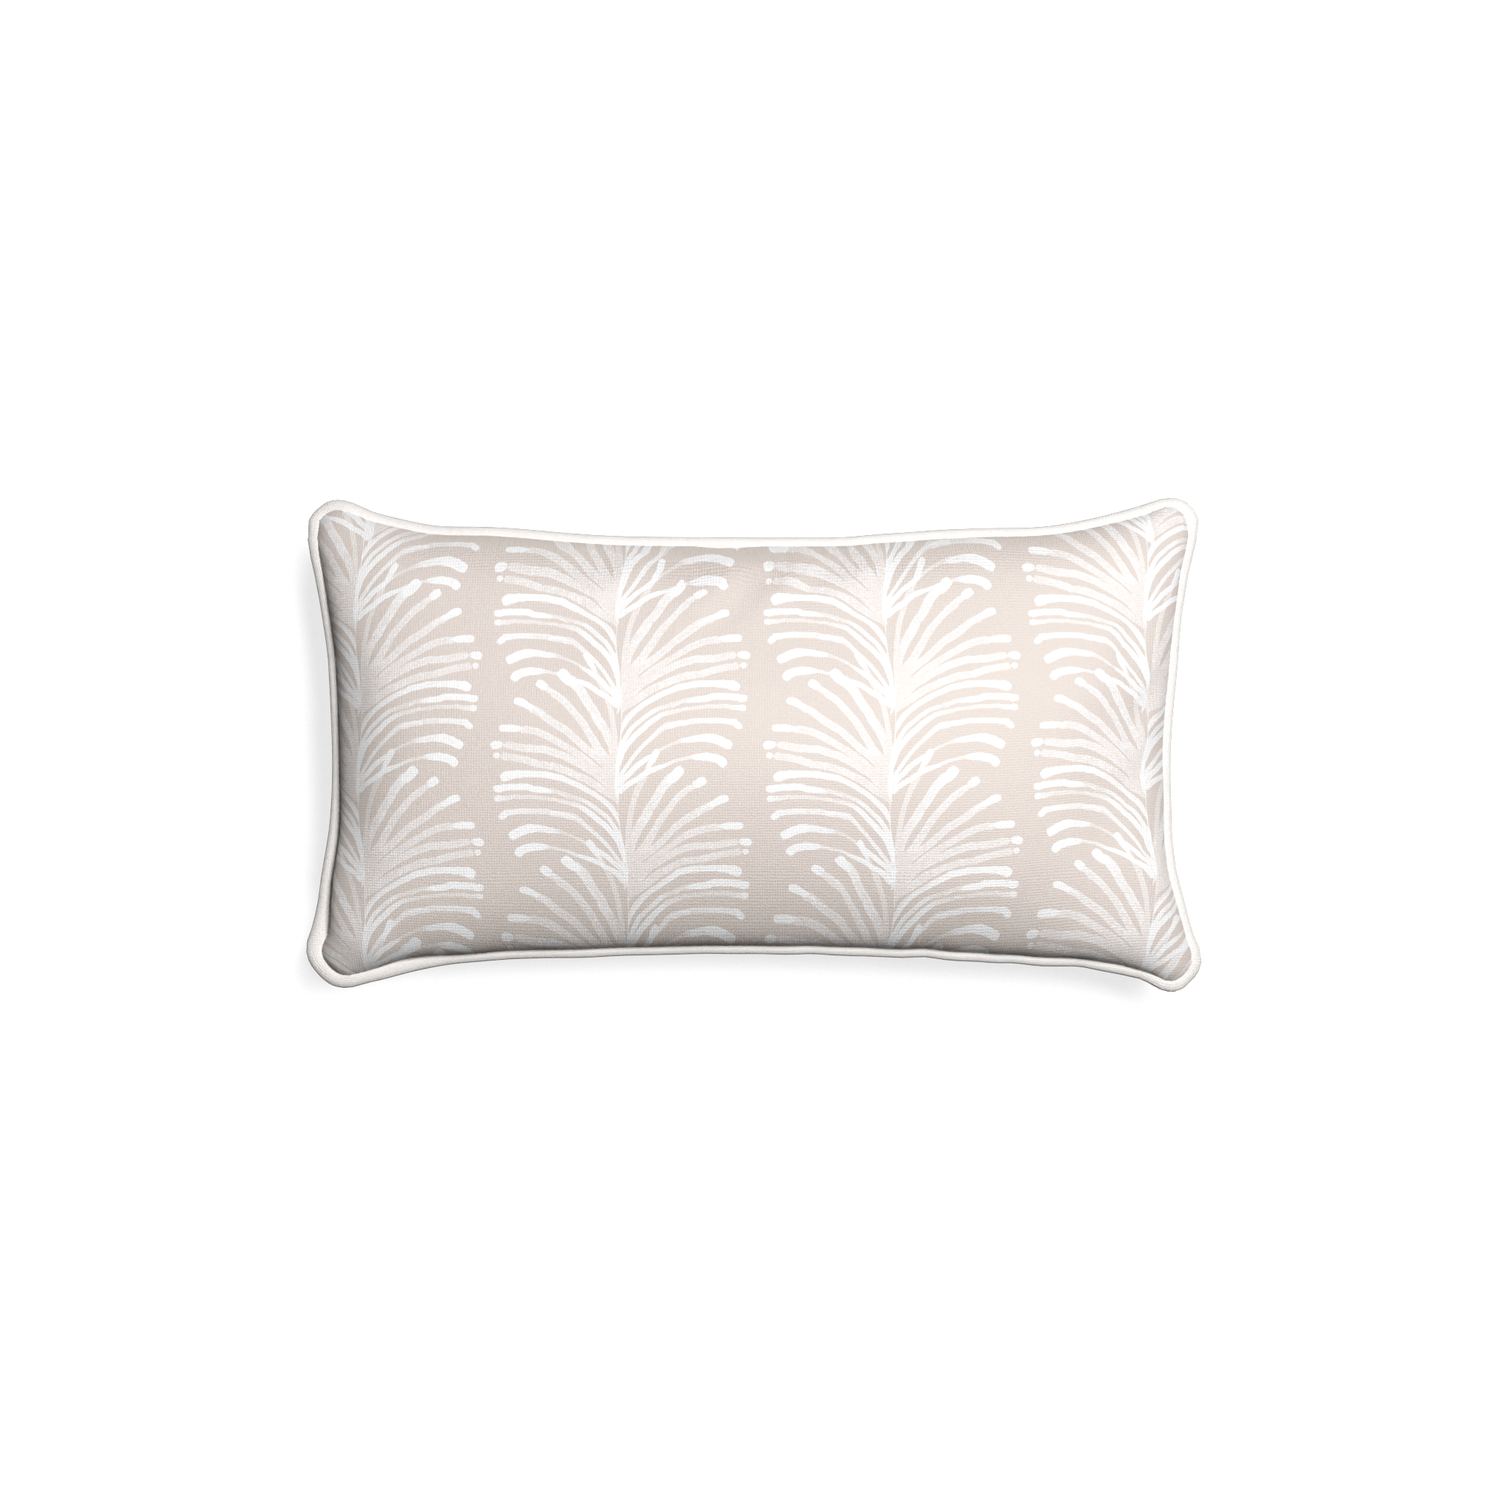 Petite-lumbar emma sand custom sand colored botanical stripepillow with snow piping on white background